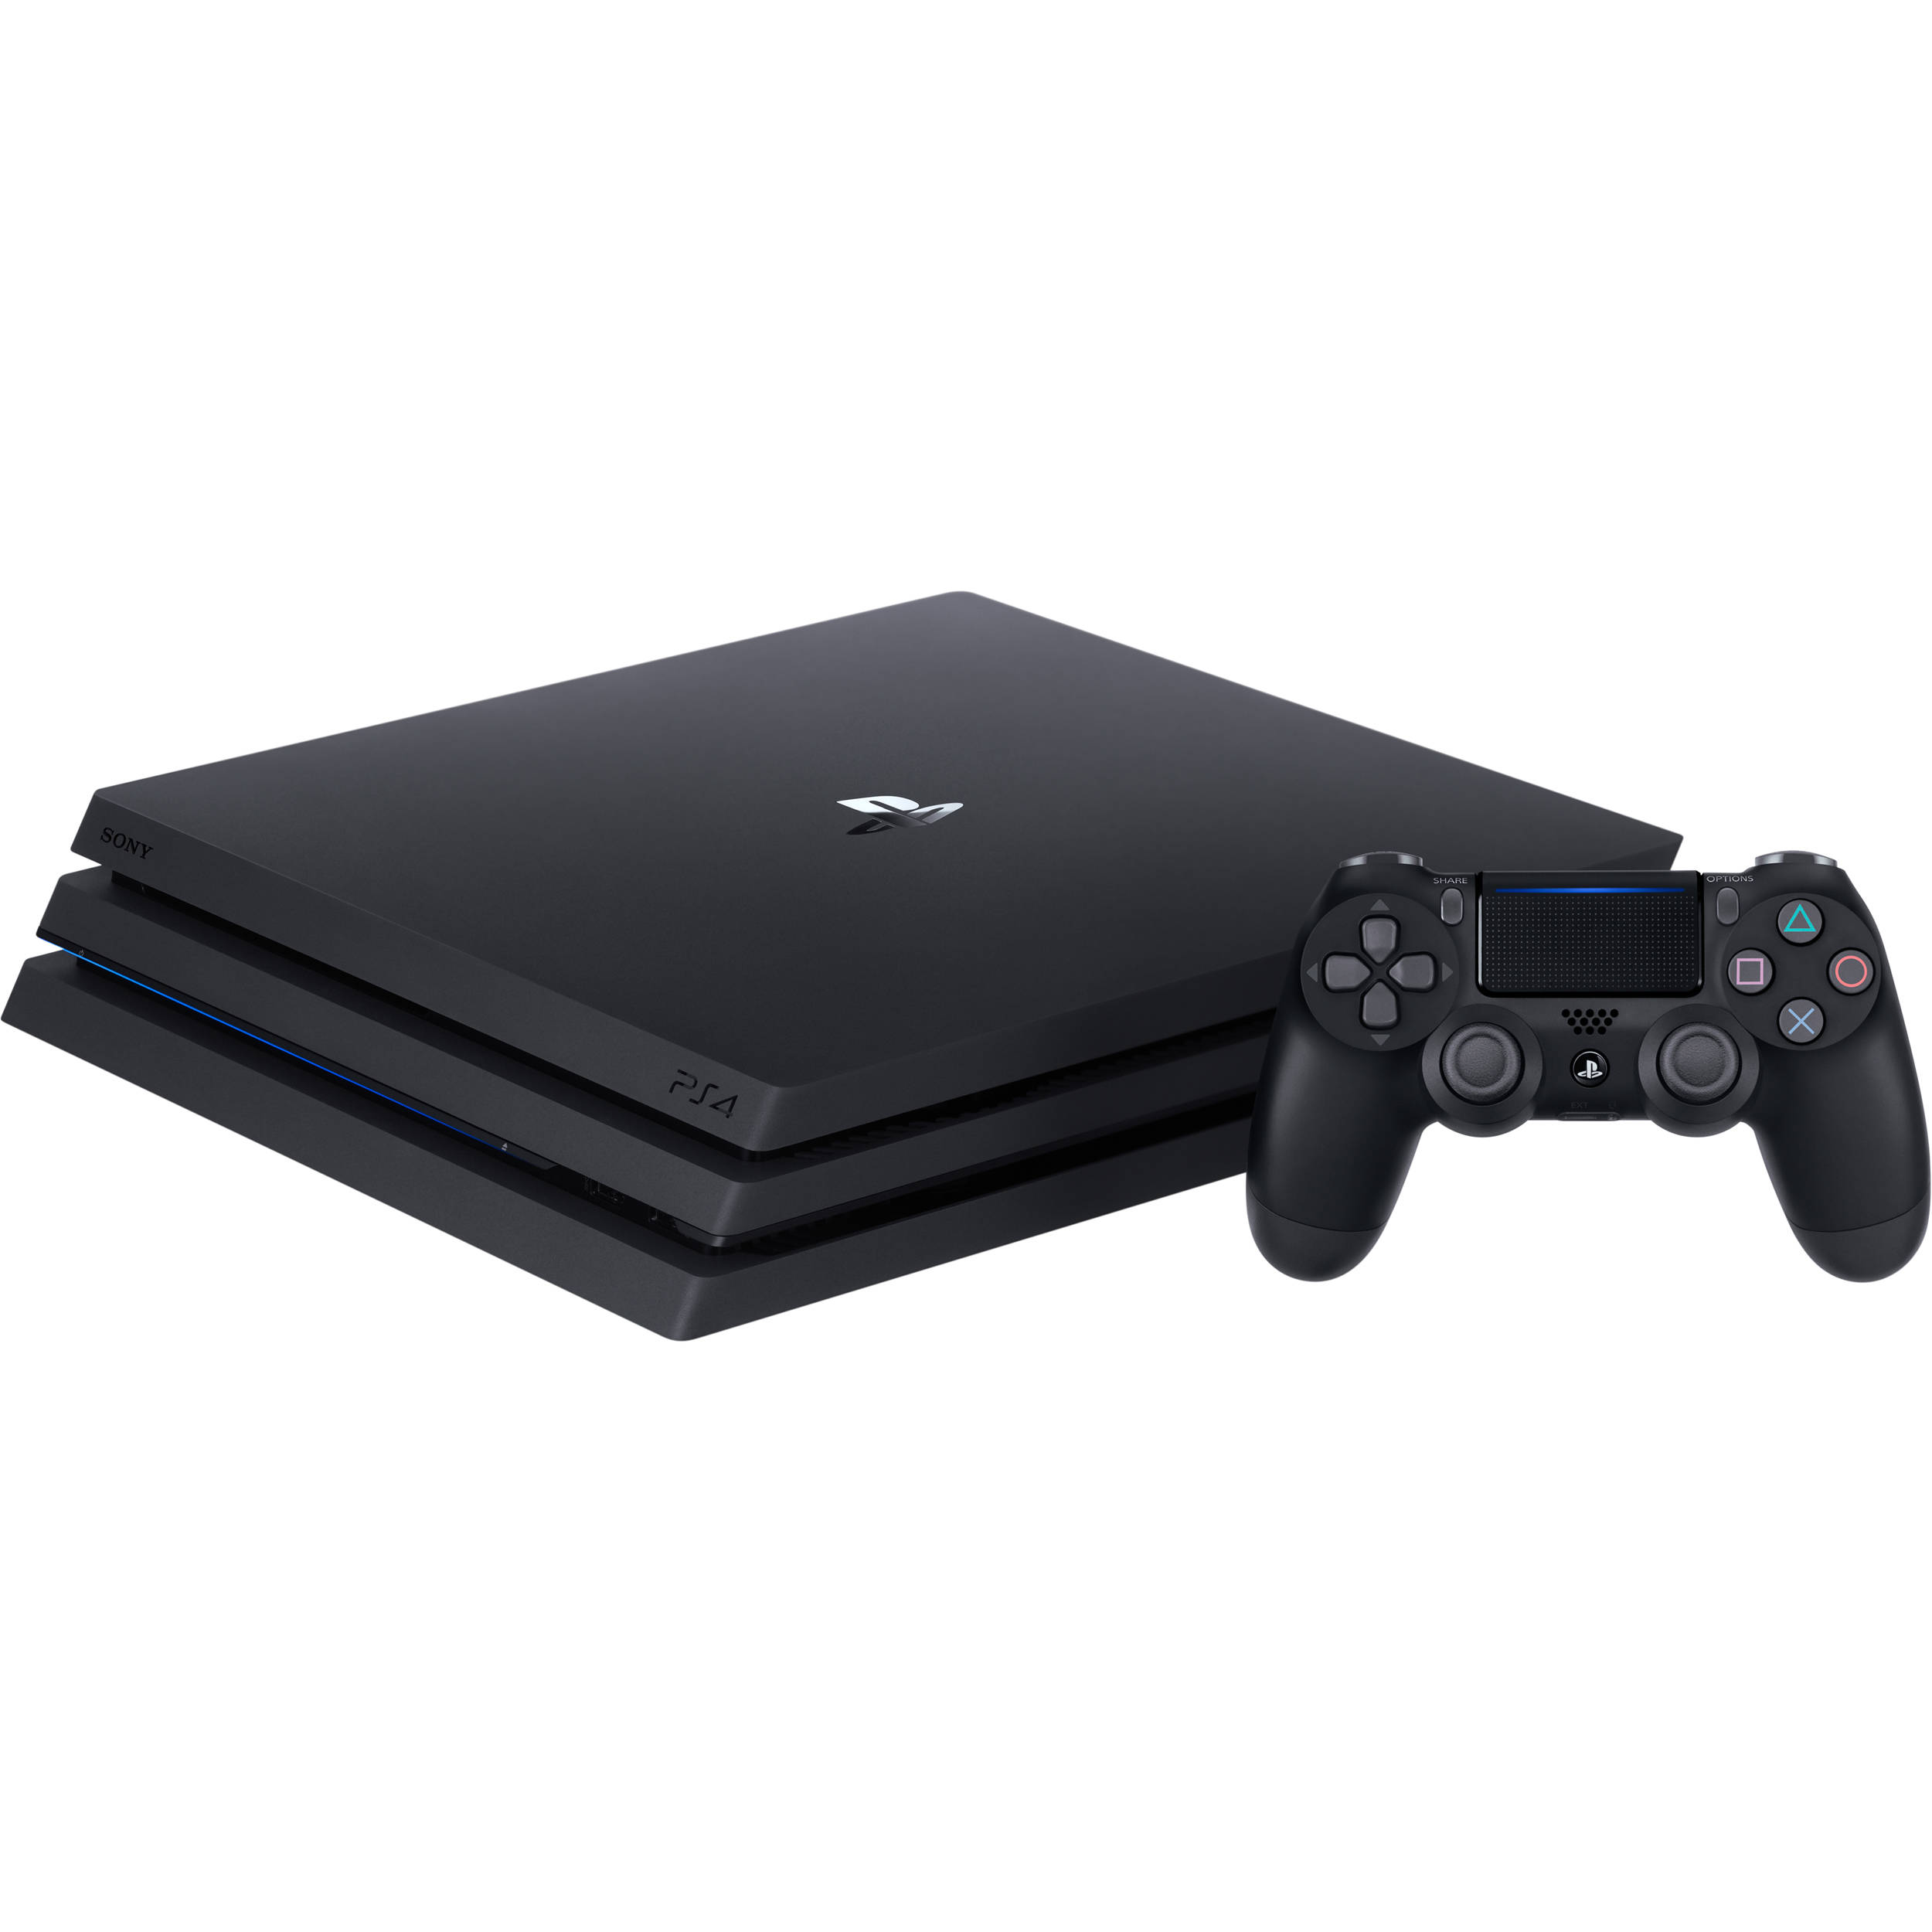 Restored Sony PlayStation 4 Pro 1TB Console, Black, RB3001510 (Refurbished) - image 2 of 5